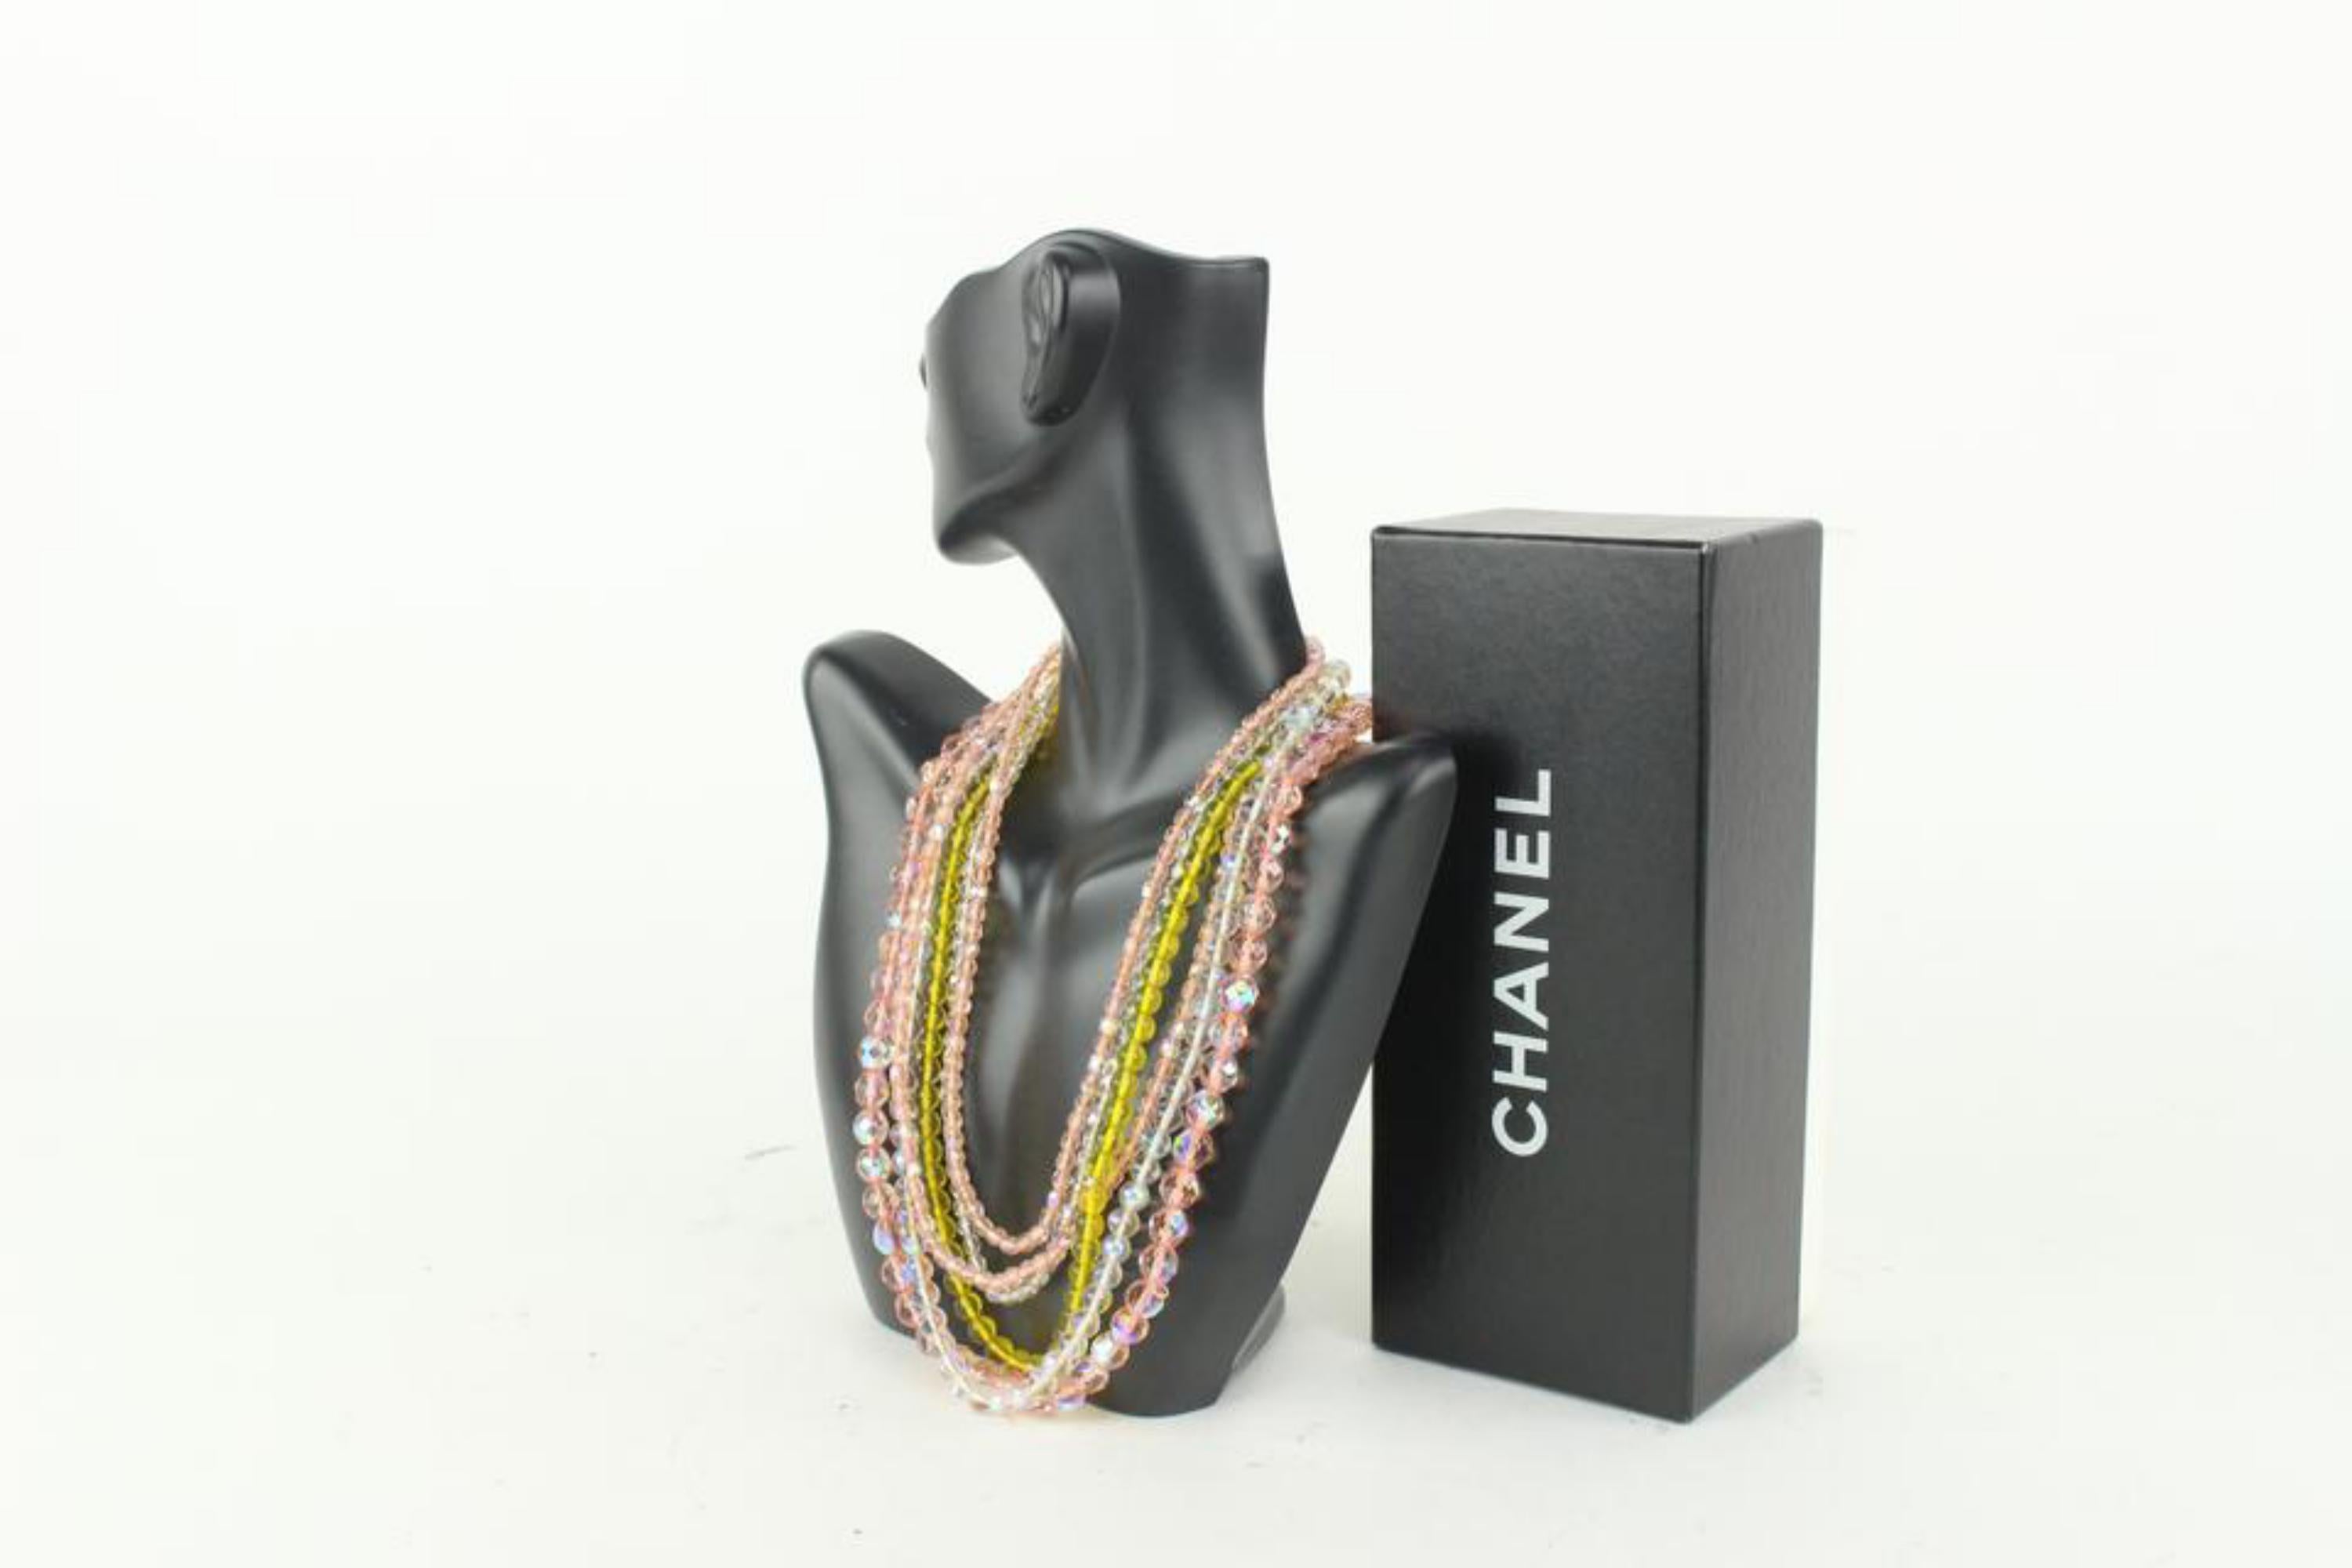 Chanel Rare Pink x Yellow Multi Strand Bead Stone  Choker Necklace 929cas88 For Sale 4